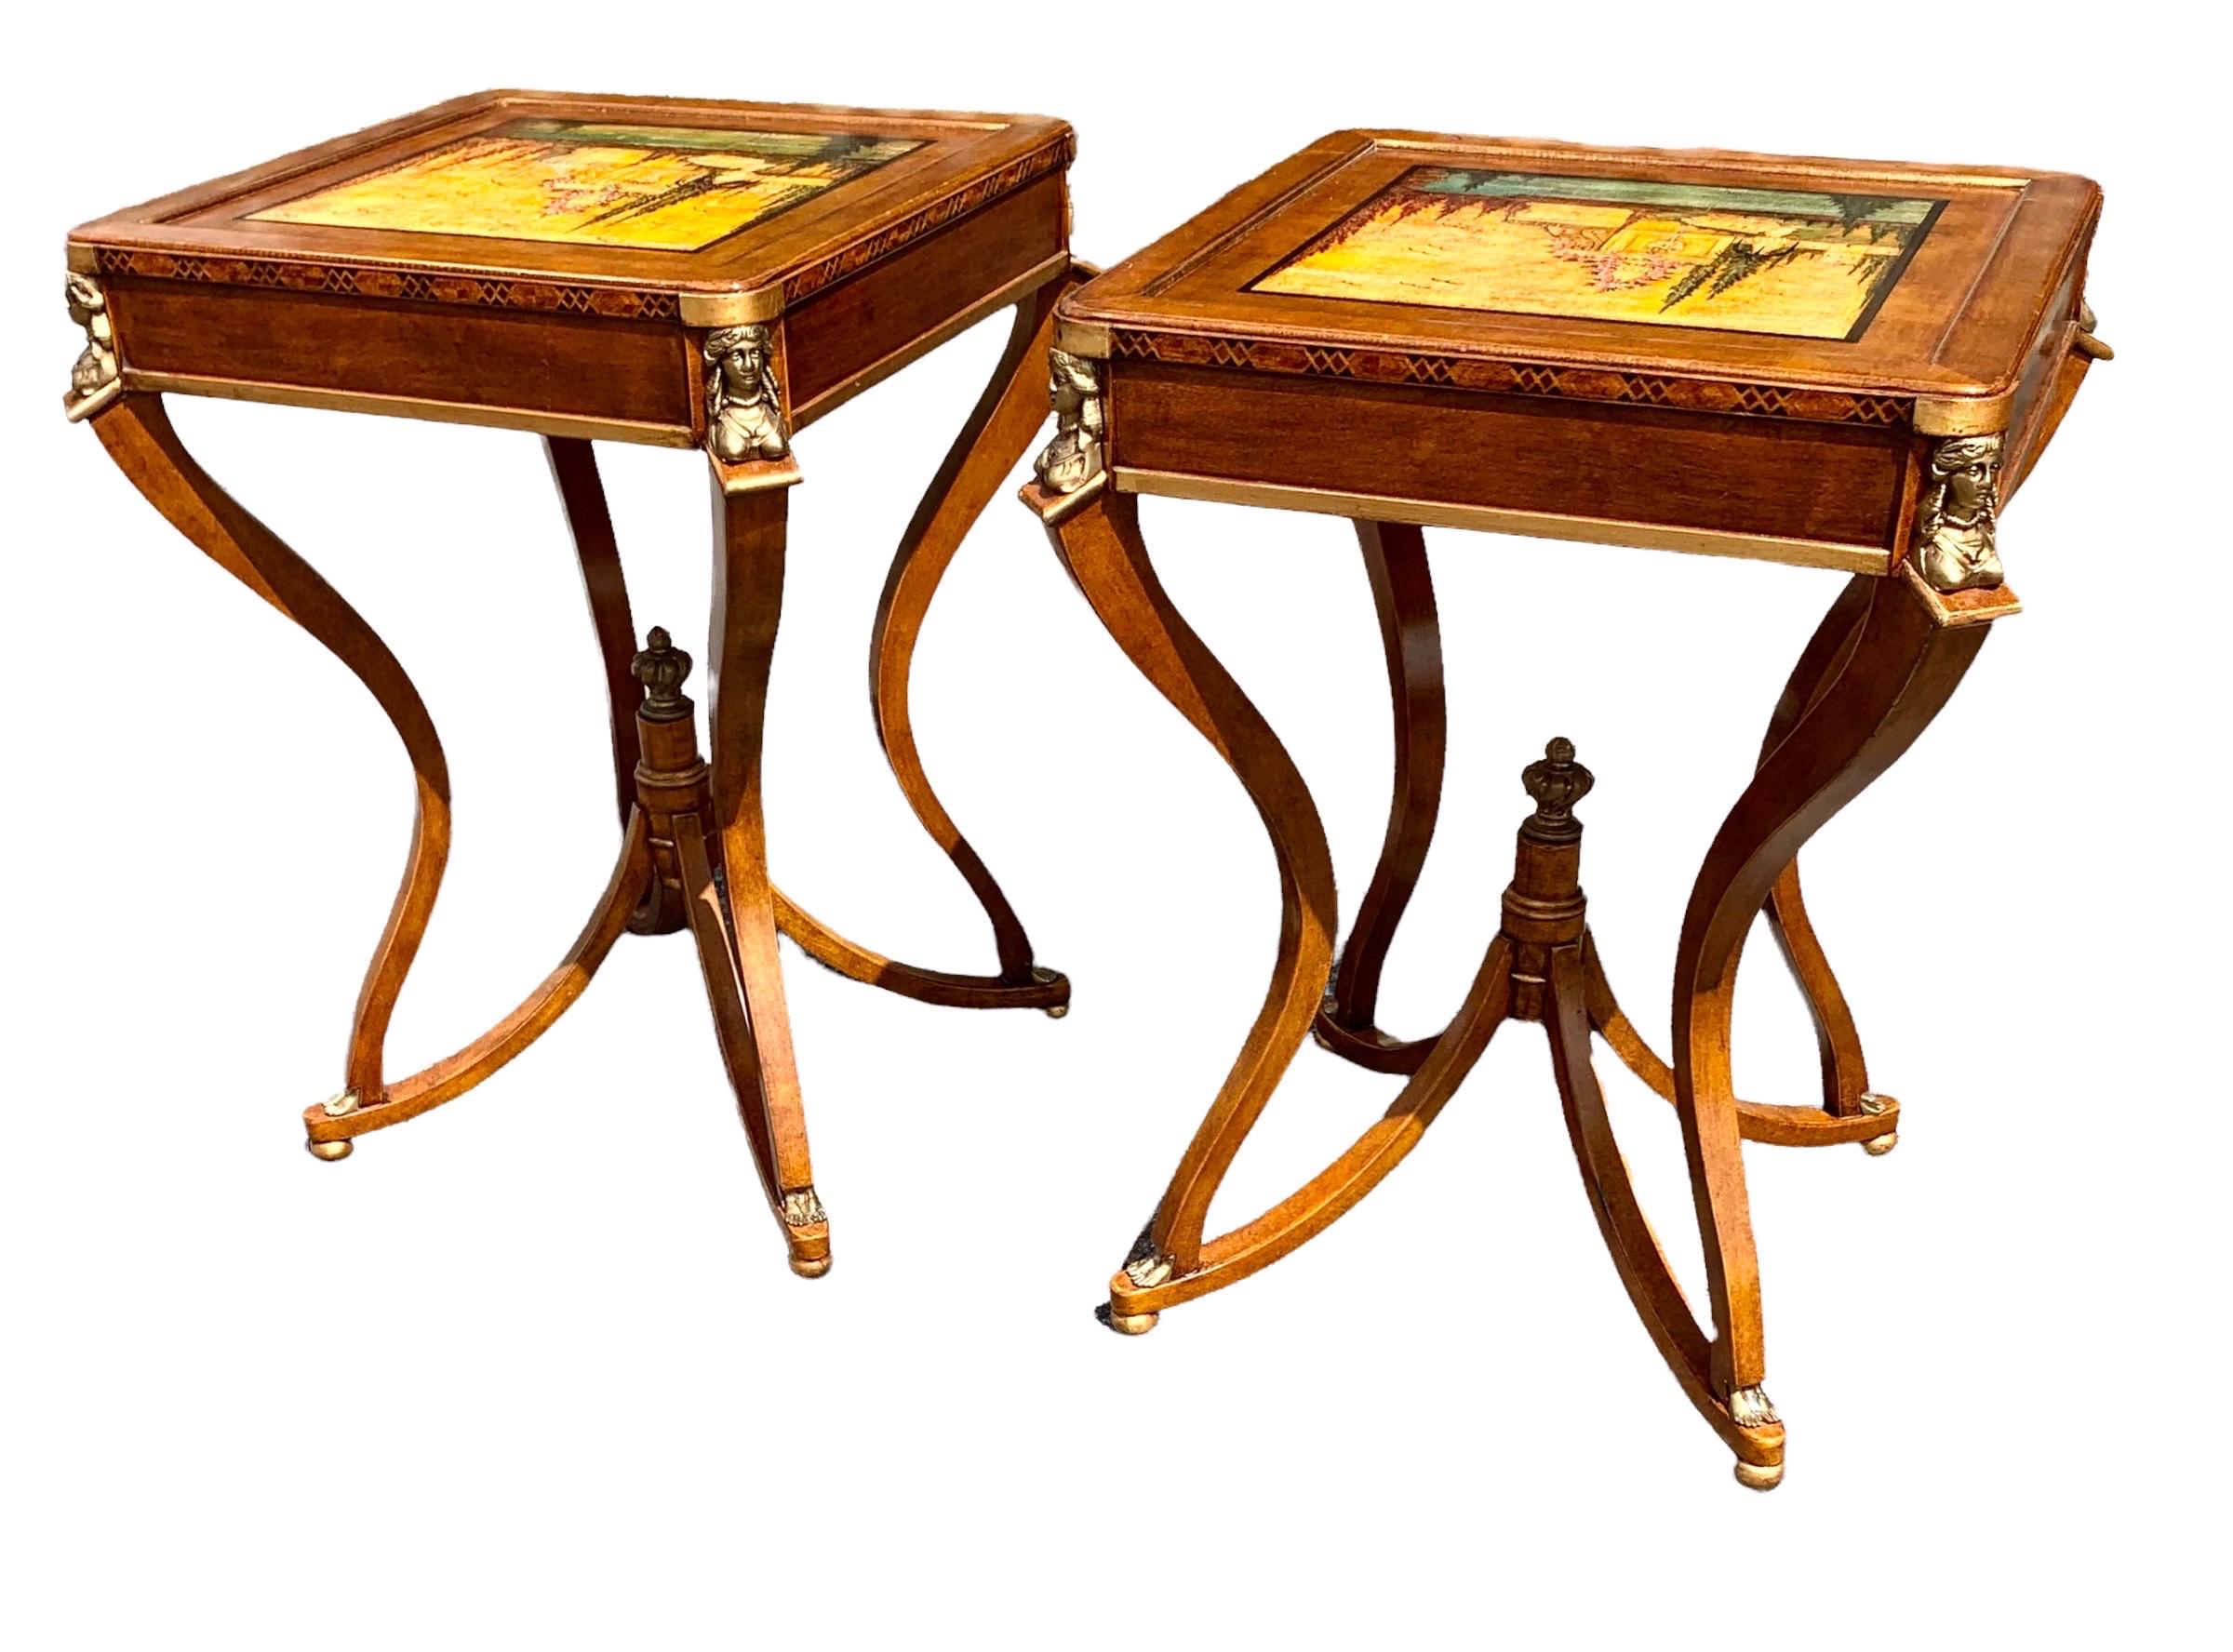 An unusual, delicate and rare set of two mid century Italian side tables with outstanding hand painted scenes of Italian gardens with flowing fountains on each of the table tops. The top four corners of each table having ormolu busts of women, the